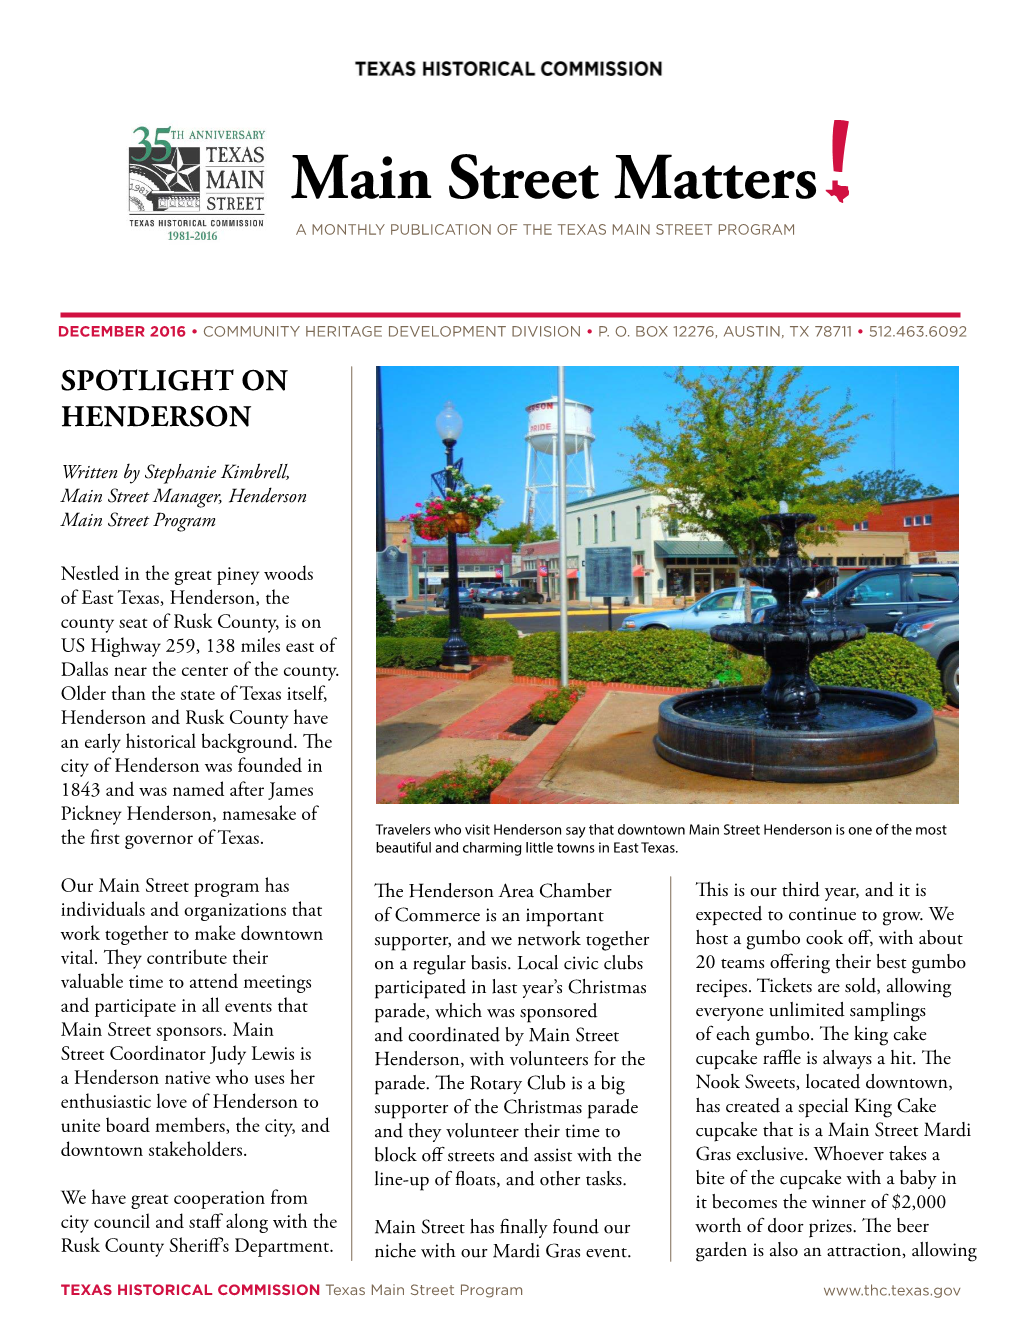 Main Street Matters a MONTHLY PUBLICATION of the TEXAS MAIN STREET PROGRAM